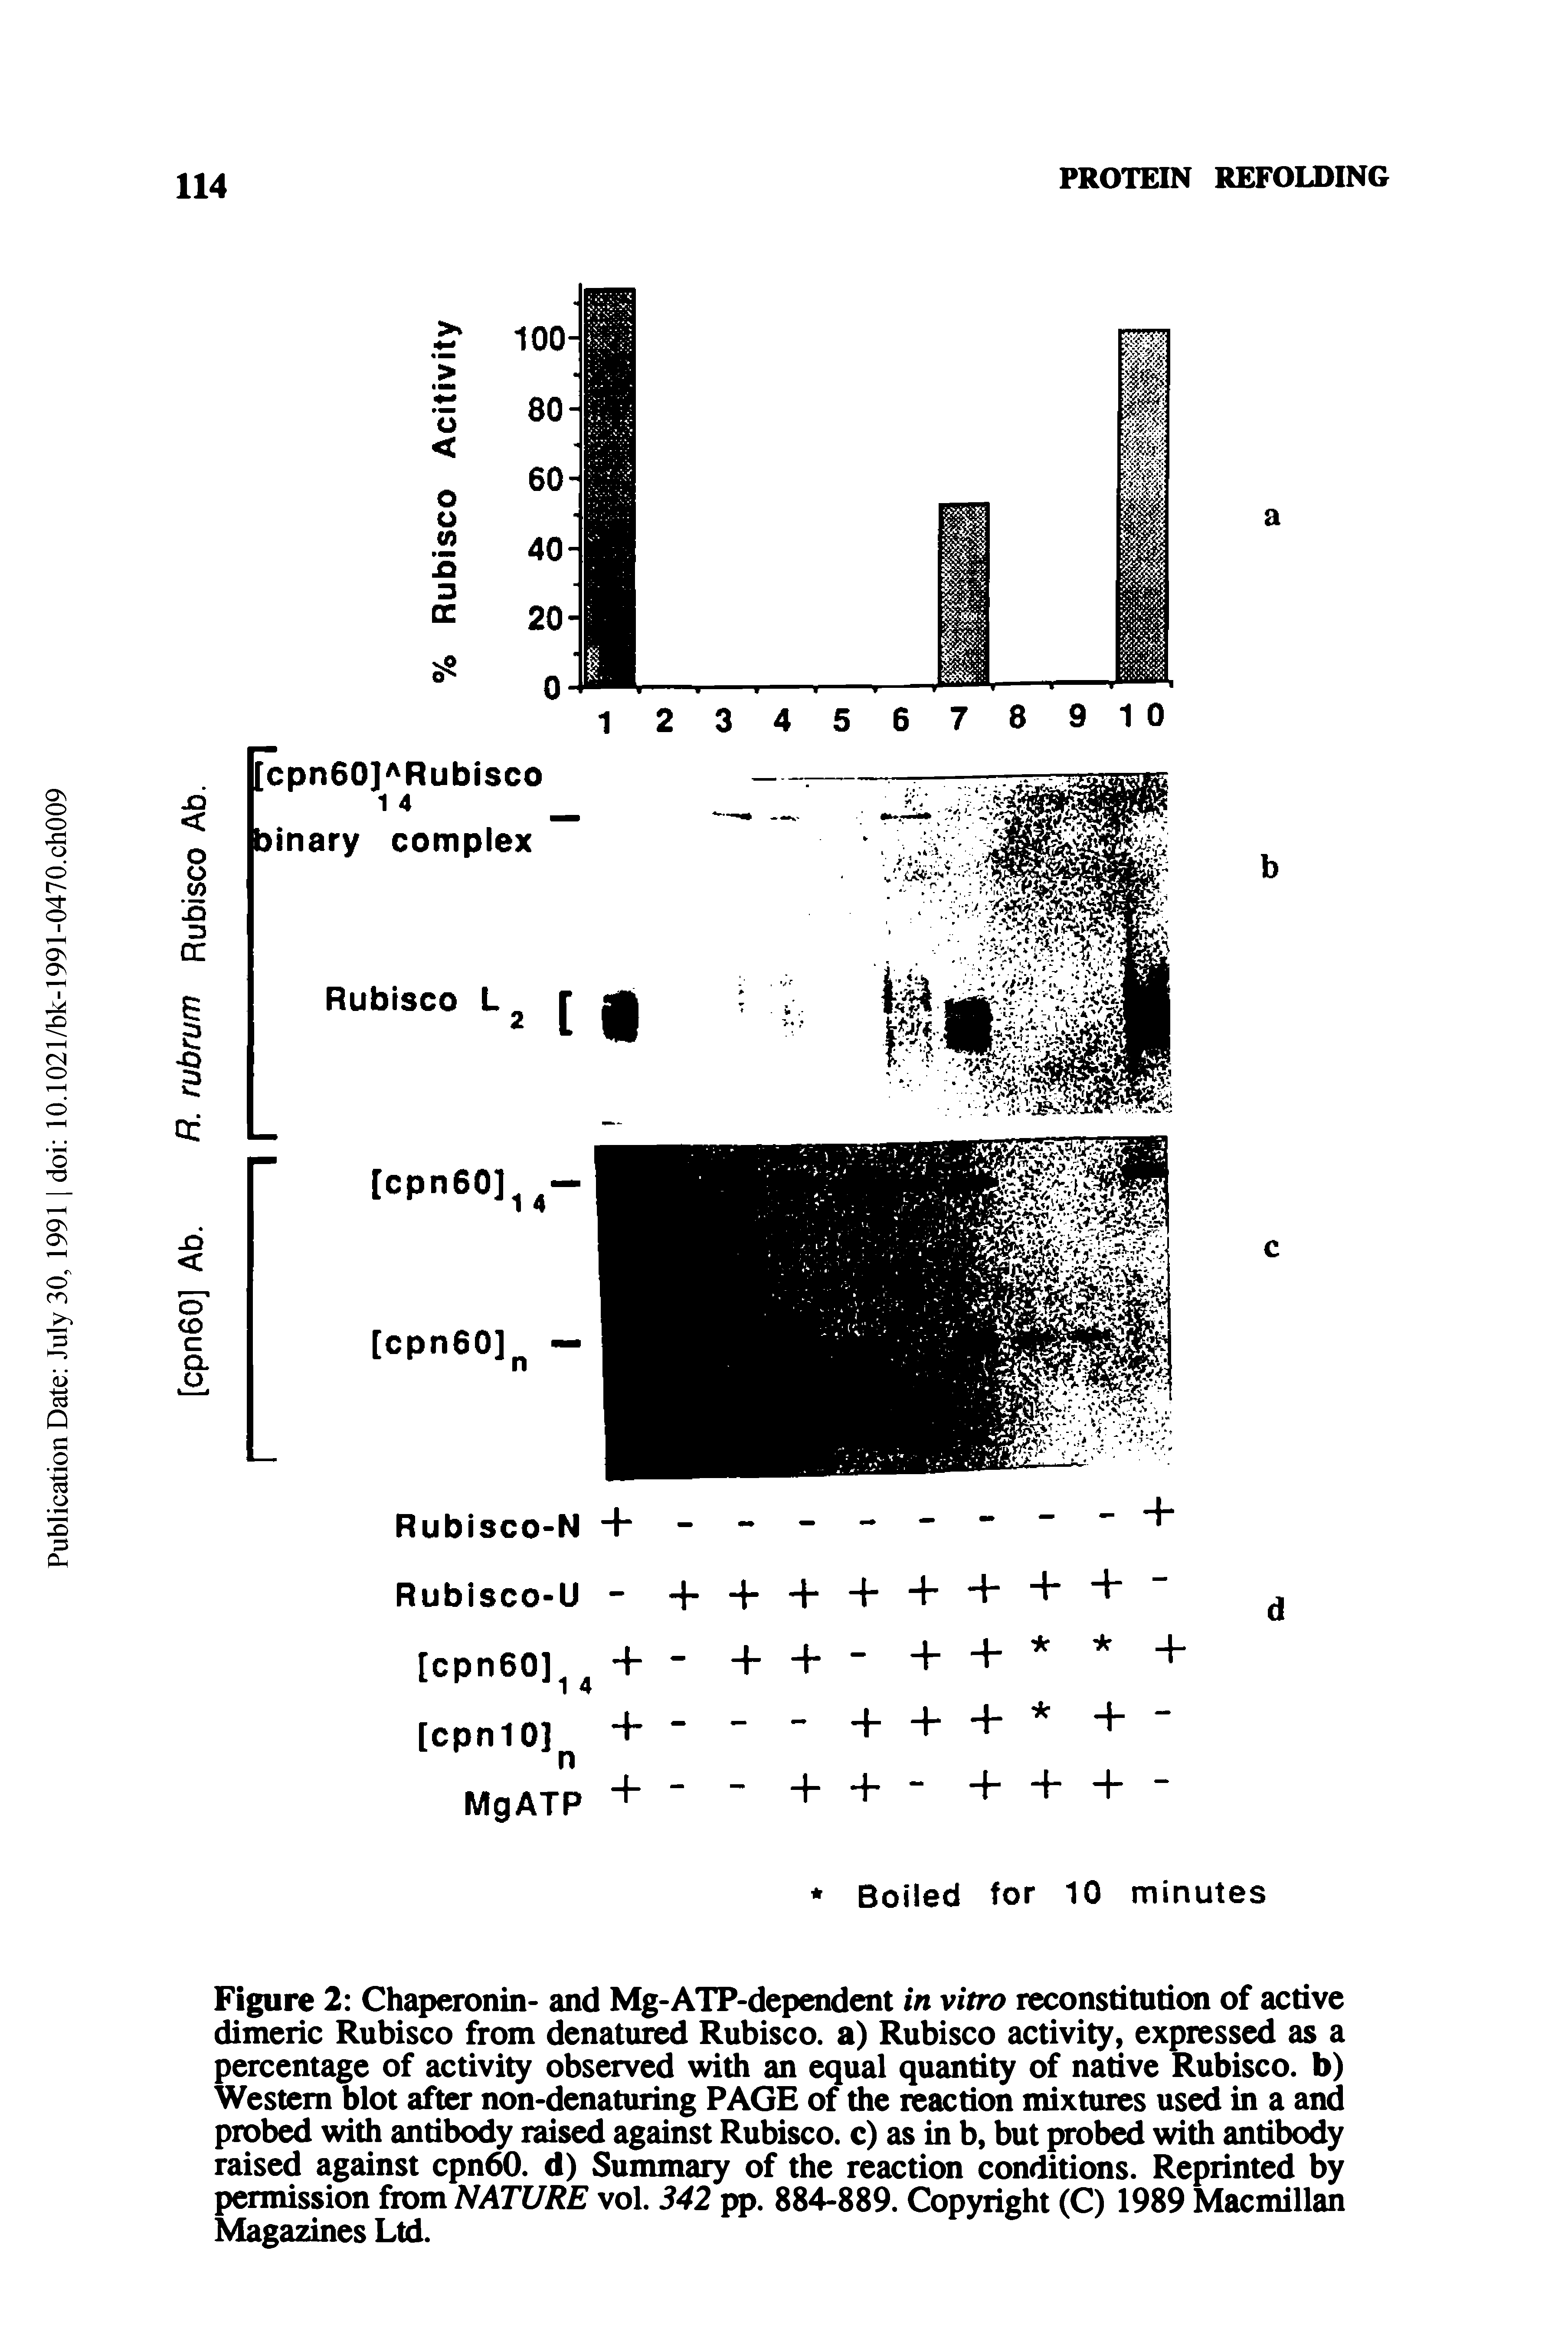 Figure 2 Chaperonin- and Mg-ATP-dependent in vitro reconstitution of active dimeric Rubisco from denatured Rubisco. a) Rubisco activity, expressed as a percentage of activity observed with an equal quantity of native Rubisco. b) Western blot after non-denaturing PAGE of the reaction mixtures used in a and probed with antibody raised against Rubisco. c) as in b, but probed with antibody raised against cpn60. d) Summary of the reaction conditions. Reprinted by permission from NATURE vol. 342 pp. 884-889. Copyright (C) 1989 Macmillan Magazines Ltd.